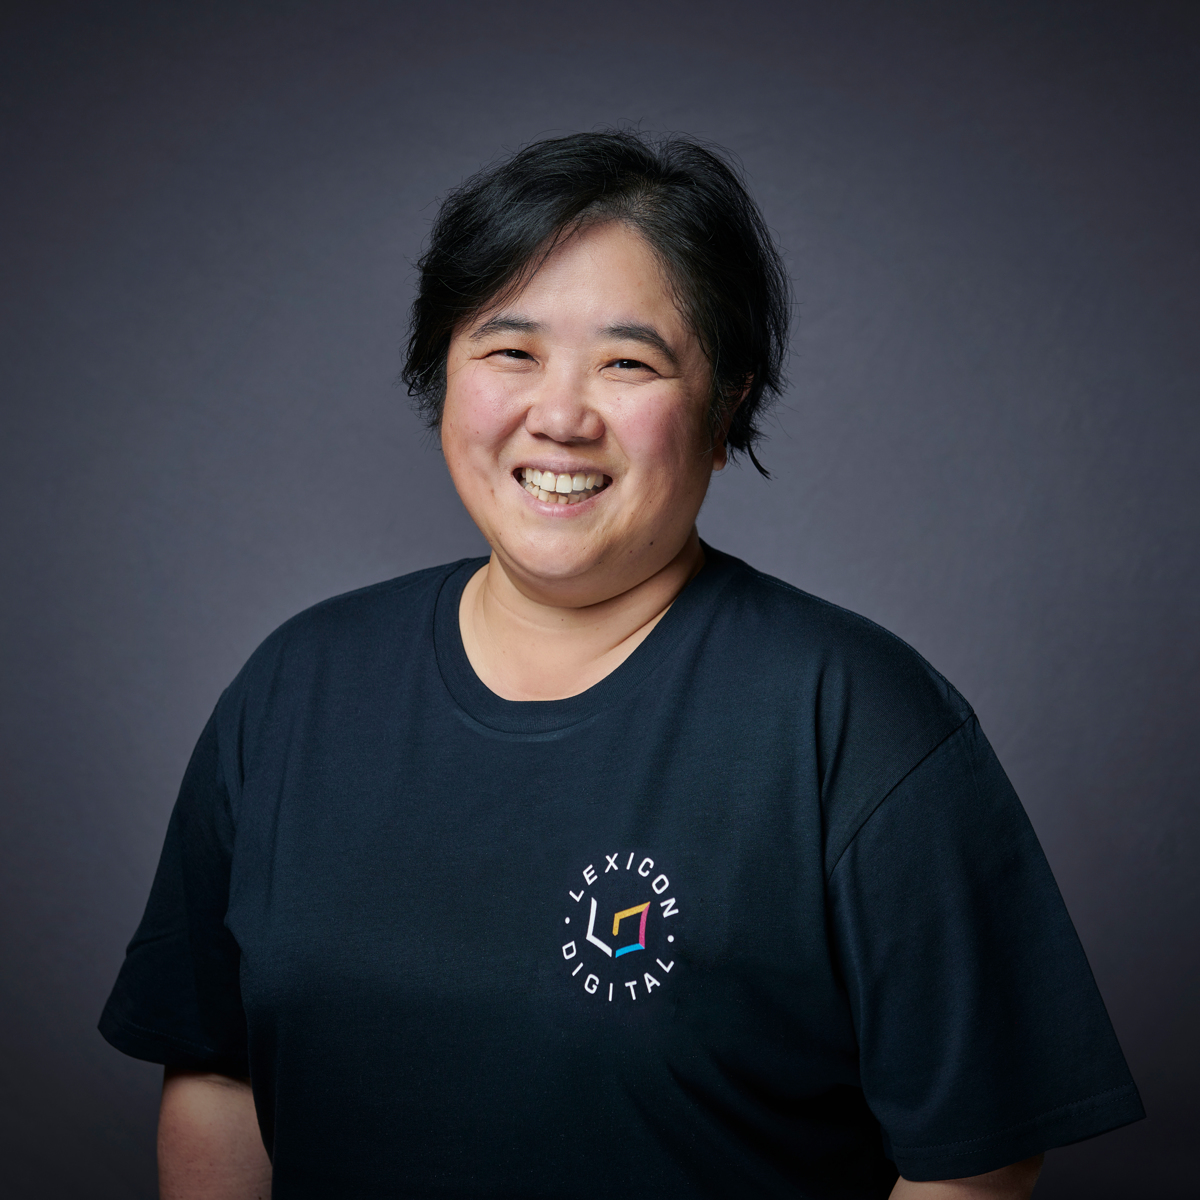 A photograph of Catherine Thum, smiling direct to camera. Behind her is a black wall. Catherine is wearing a black t-shirt, with a logo. The logo says Lexicon Digital.